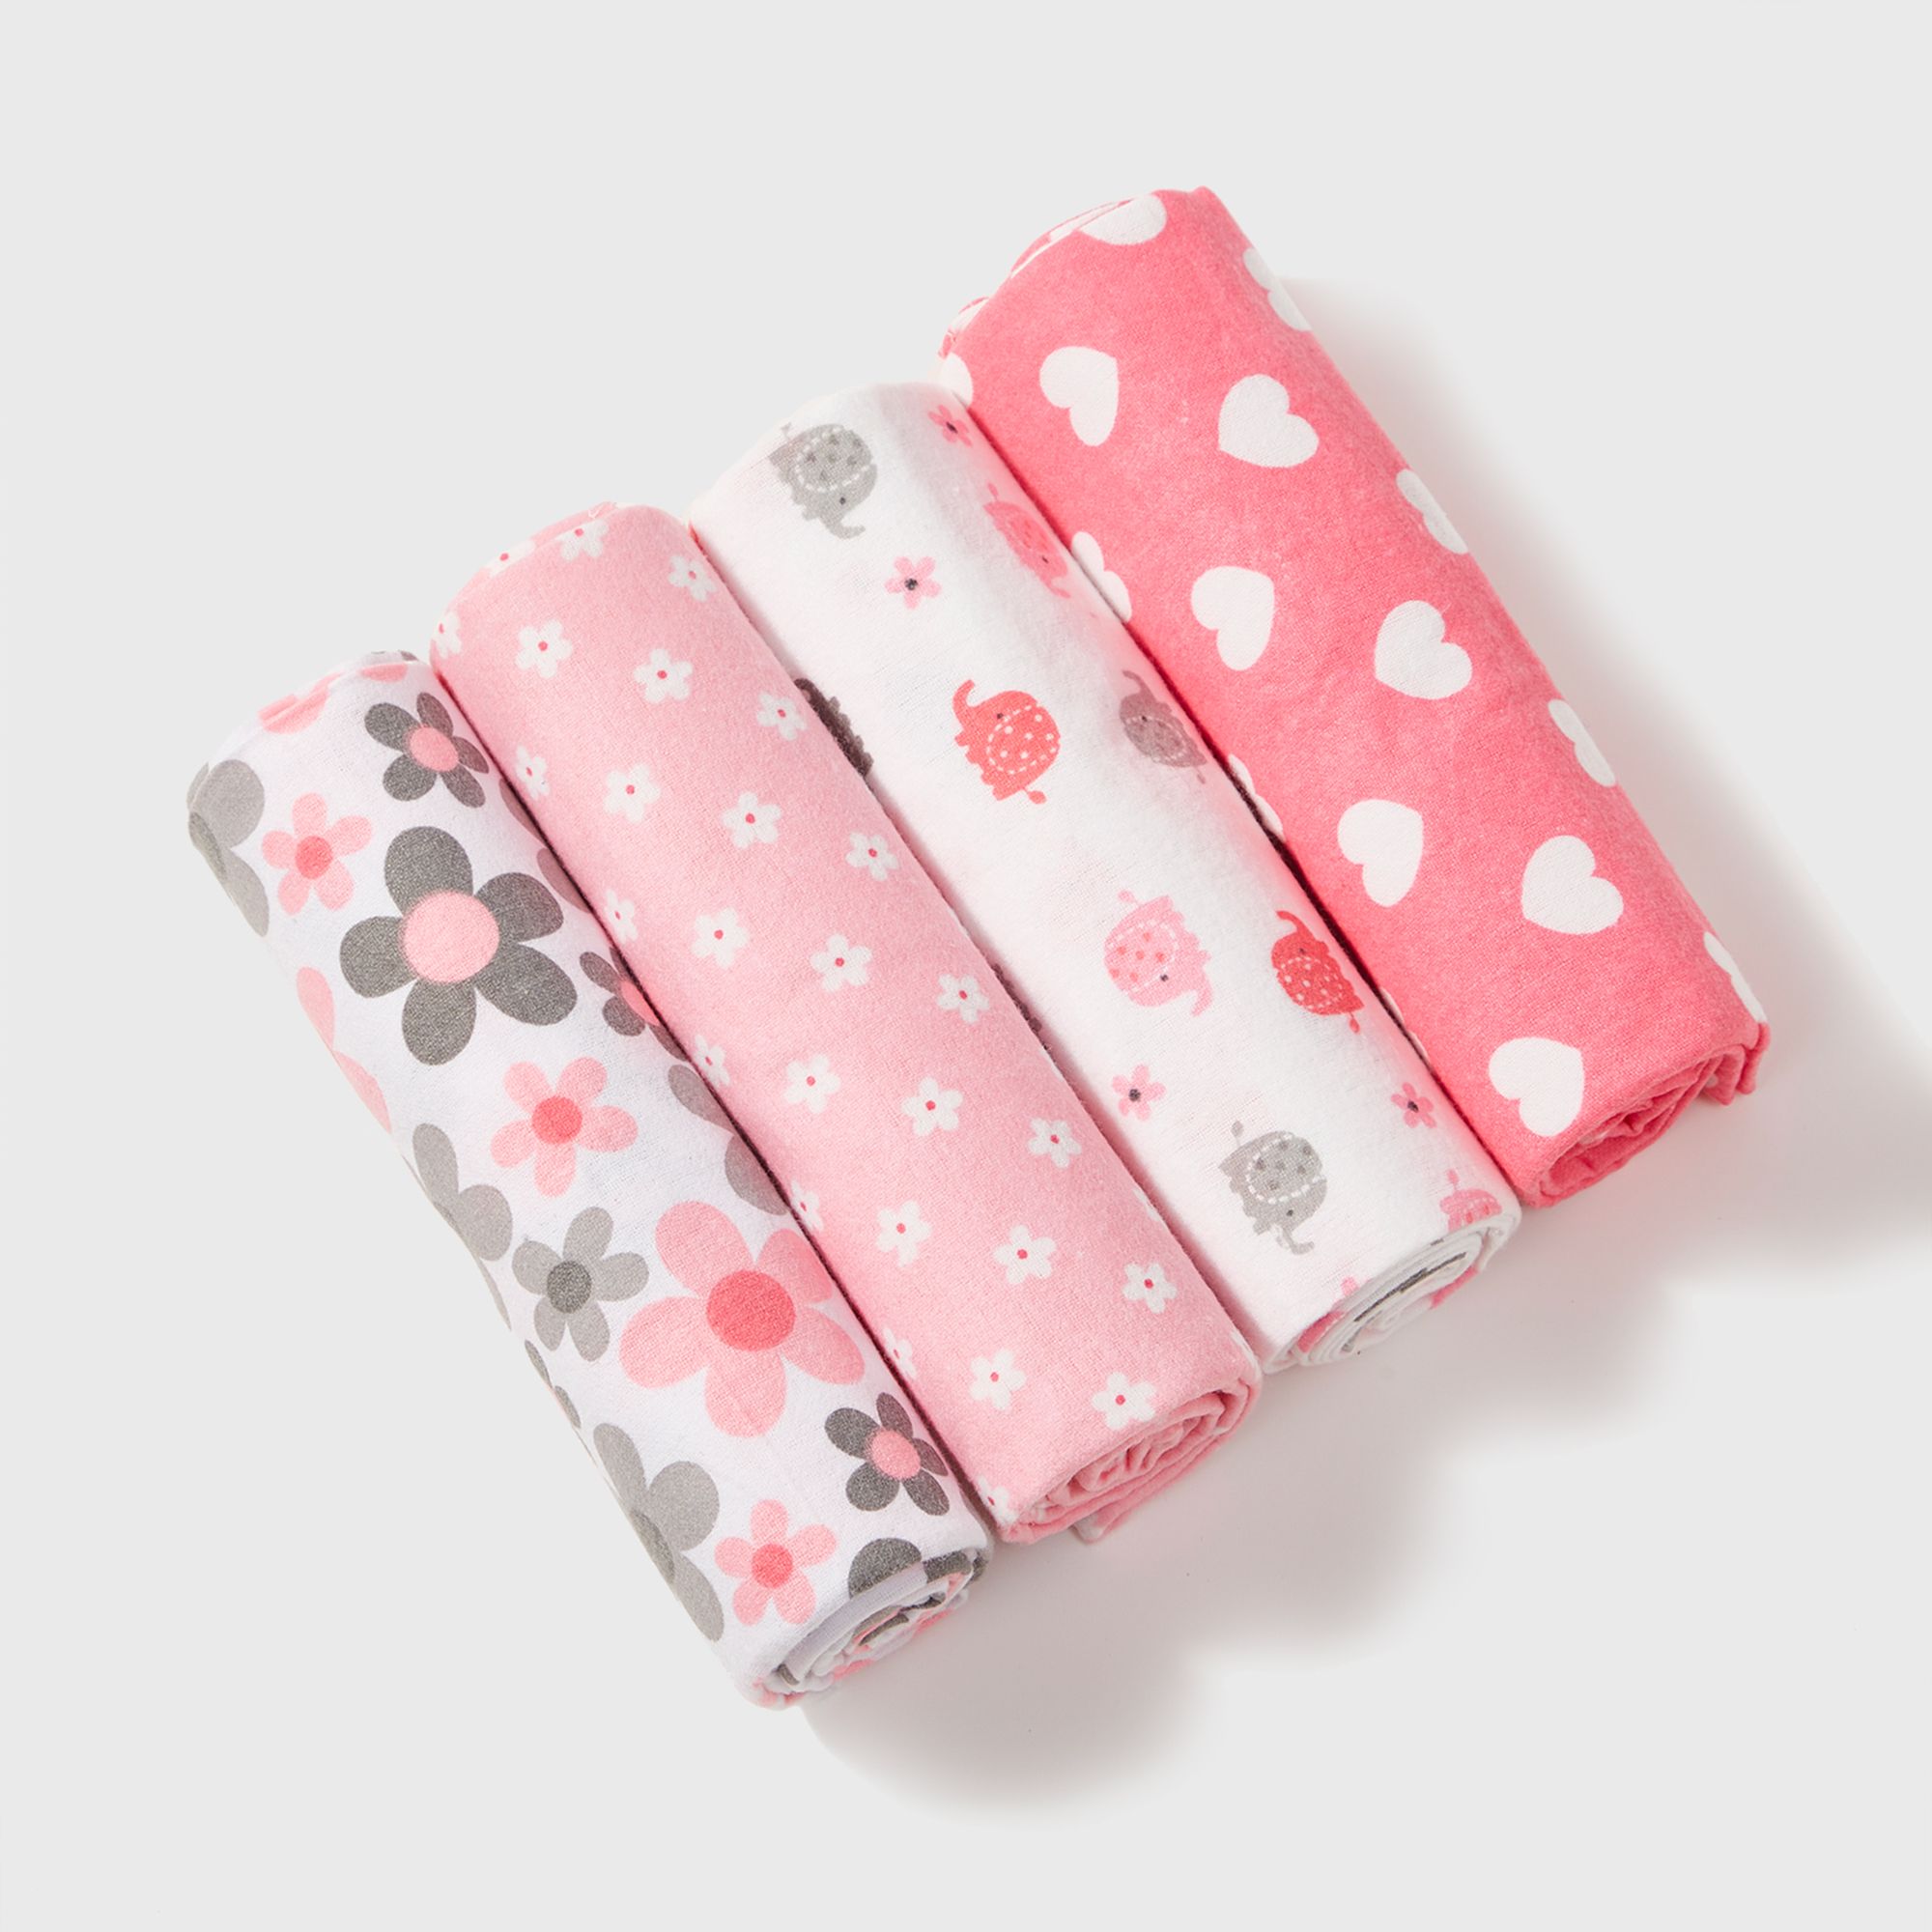 Set of 4 Baby Flannel Blankets - Soft and Cozy Infant Swaddle Blankets